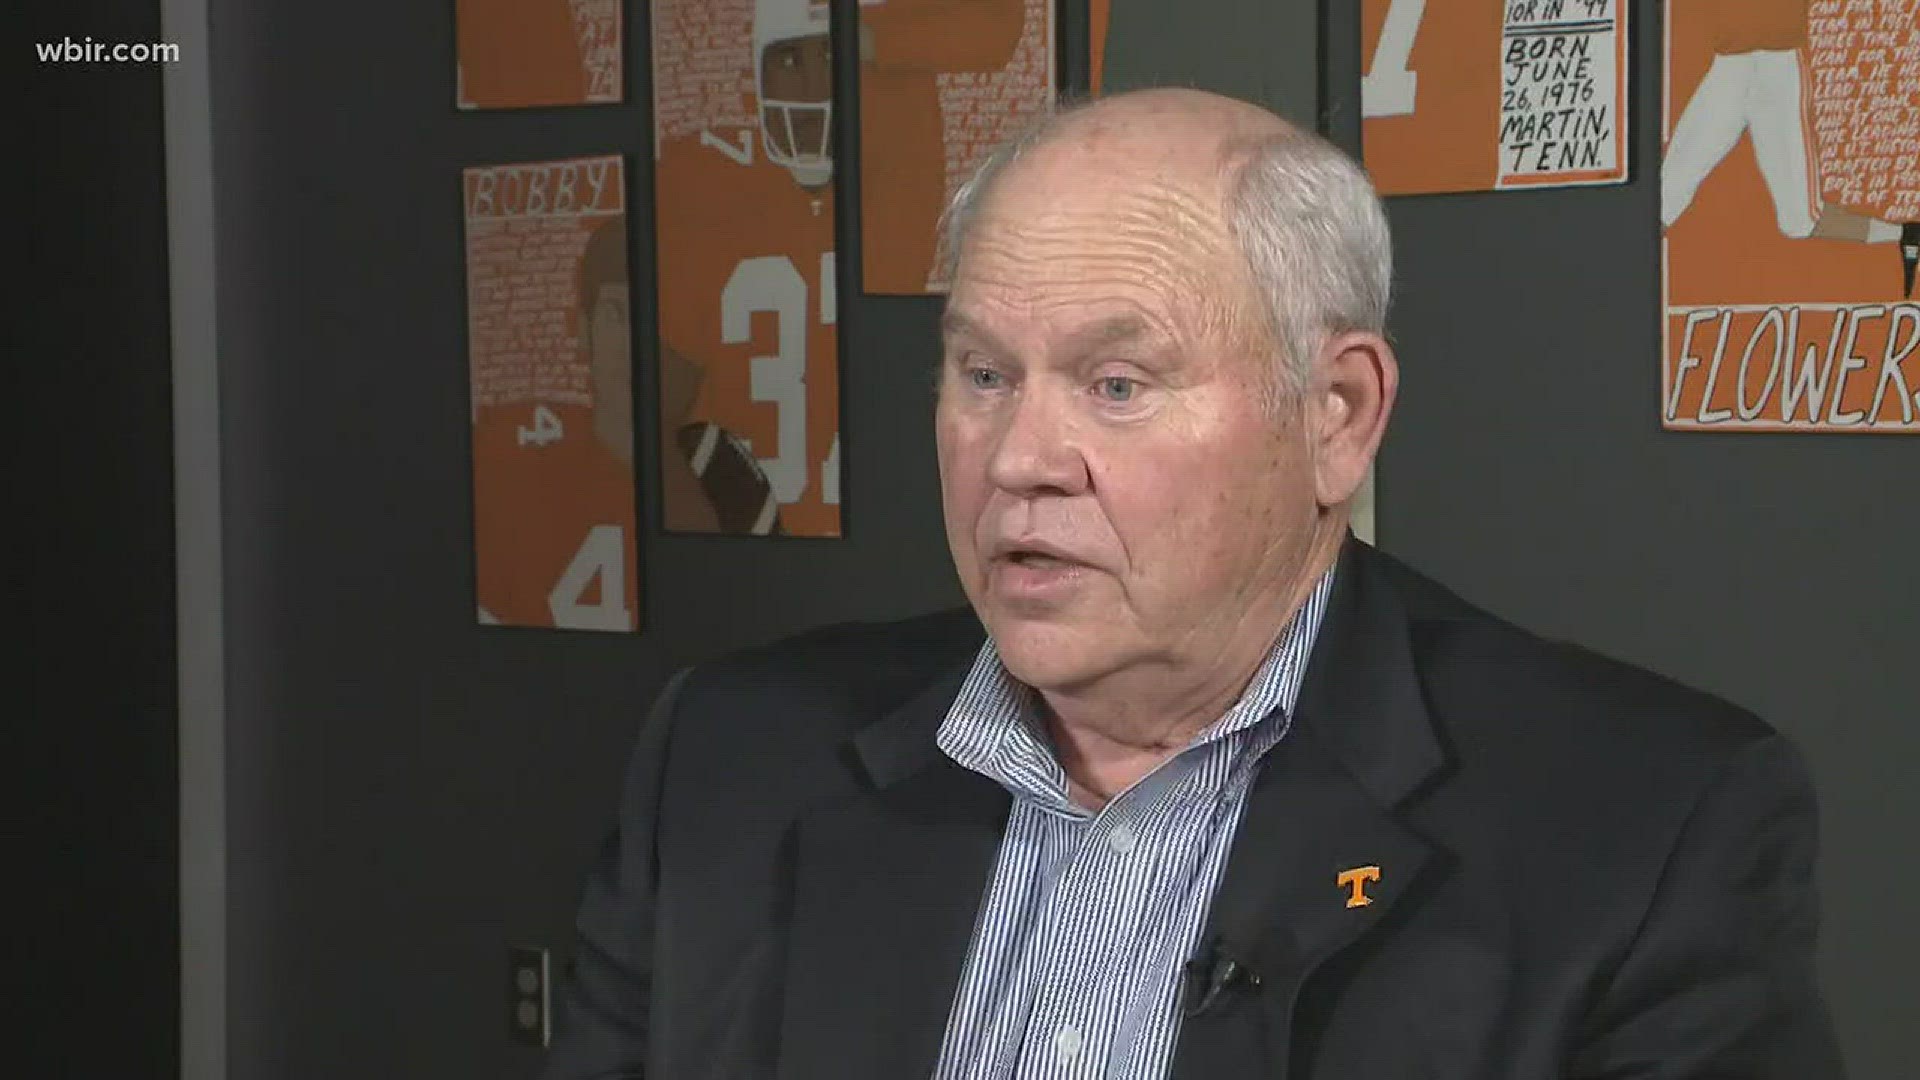 UT Athletics Director Phillip Fulmer sat in on a team meeting Tuesday with Coach Pruitt and the Vols football team.